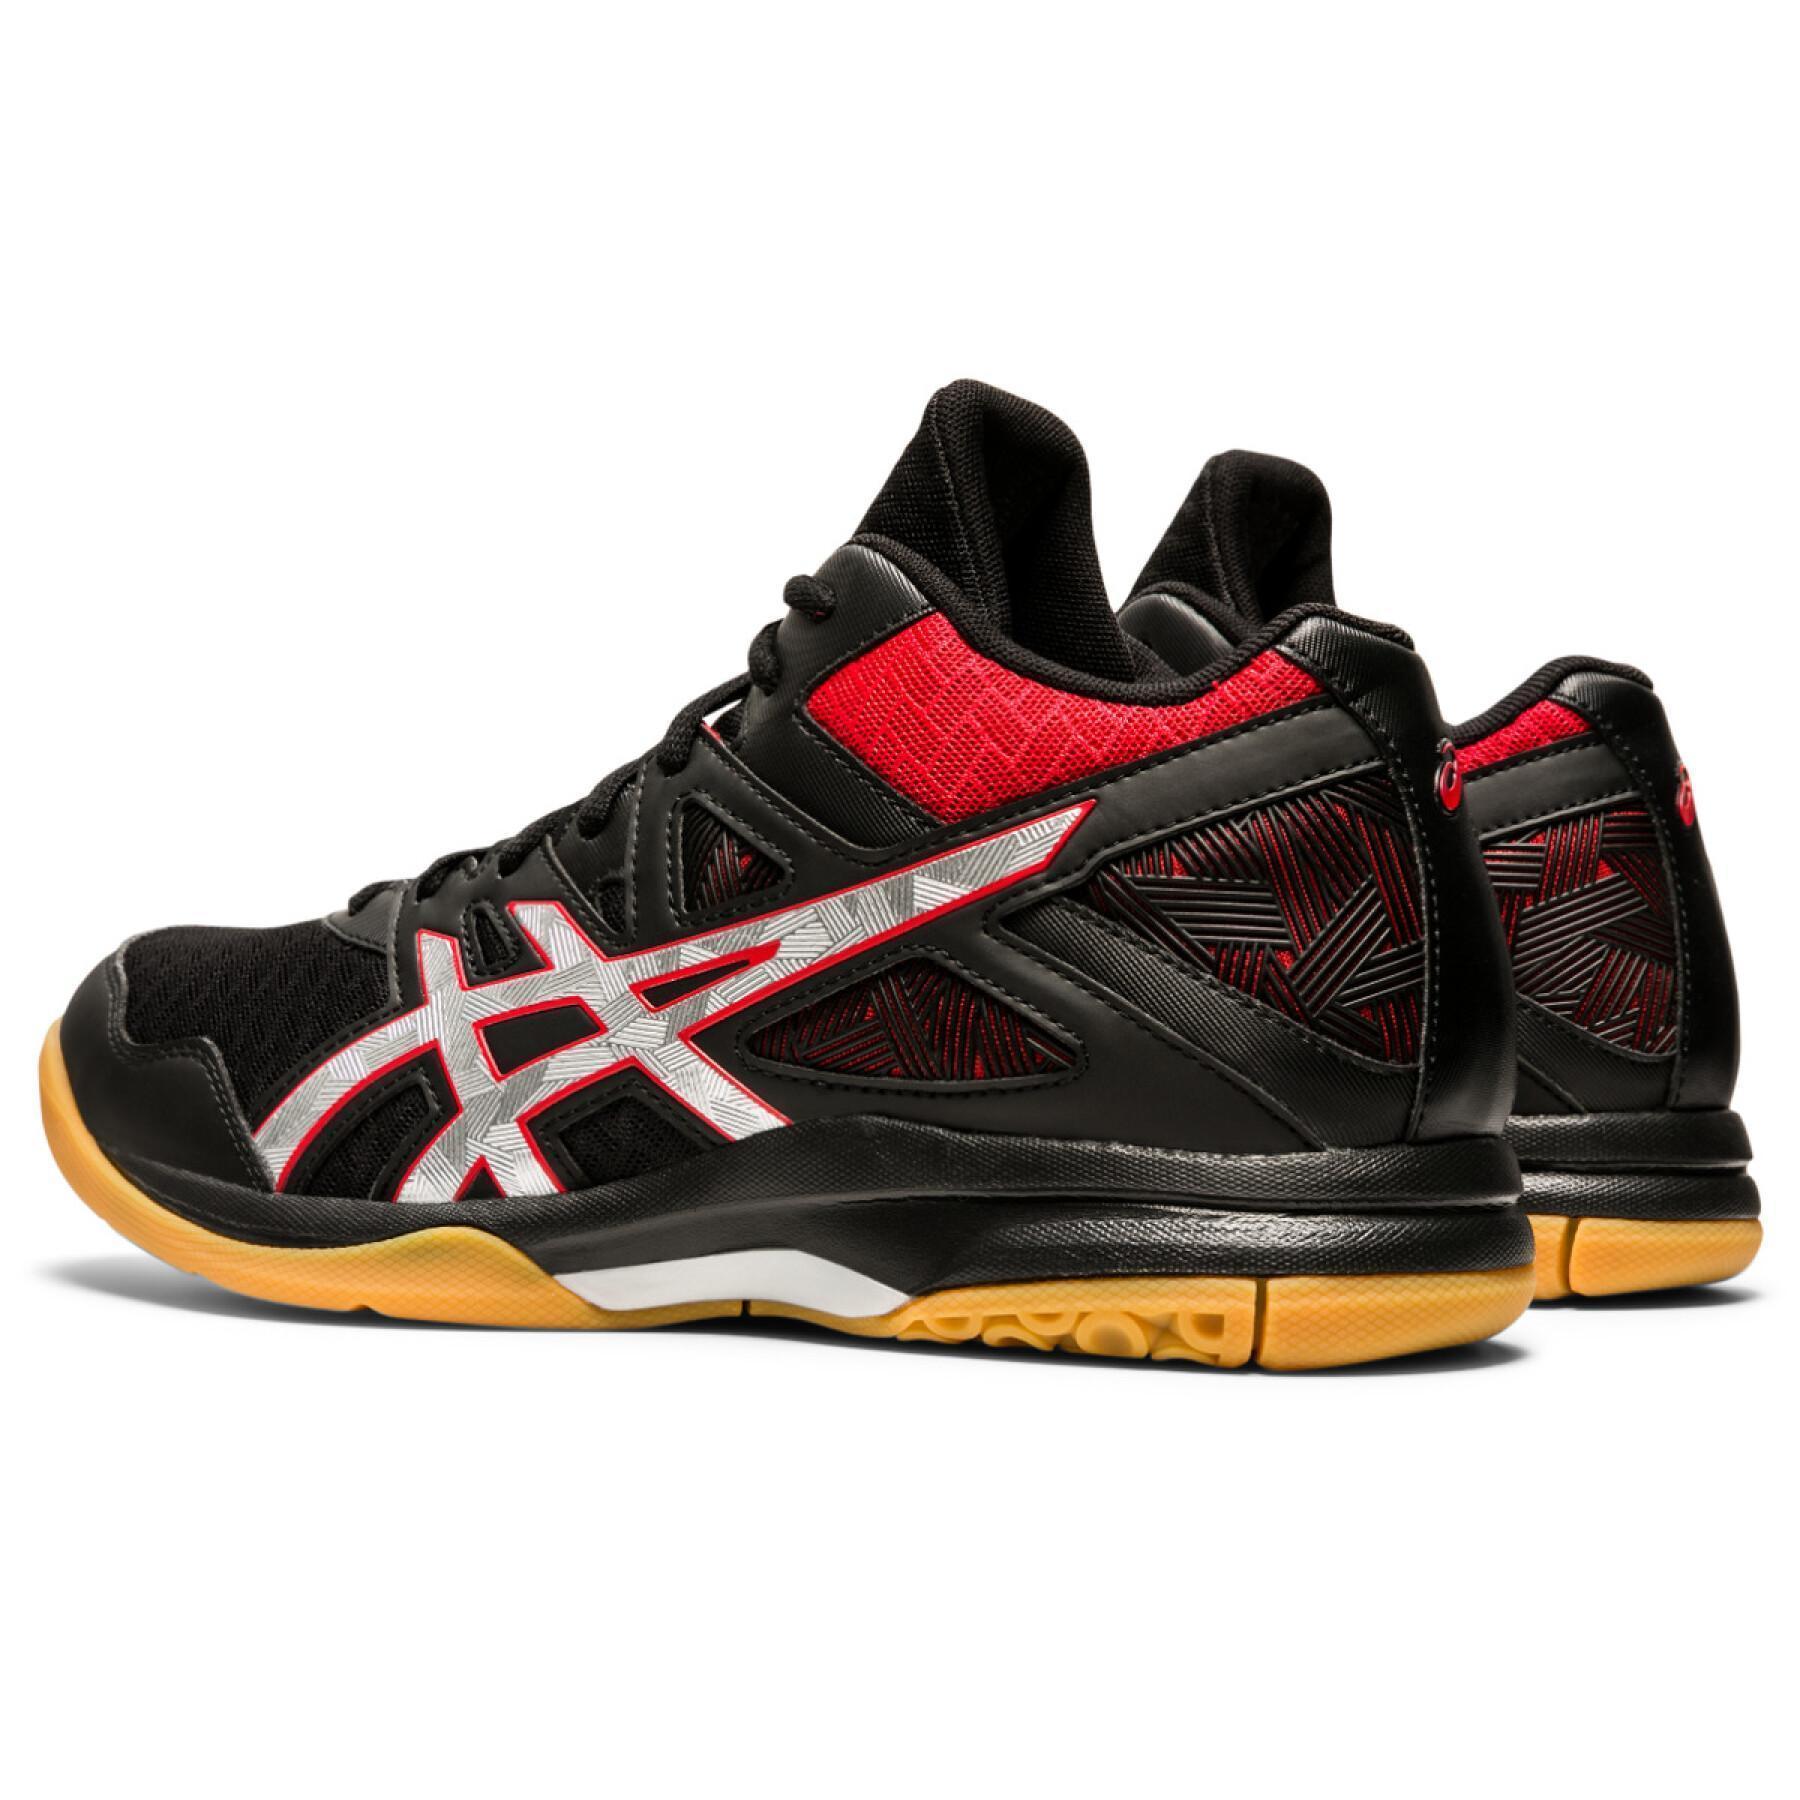 Chaussures montantes Asics Gel-Task Mt 2